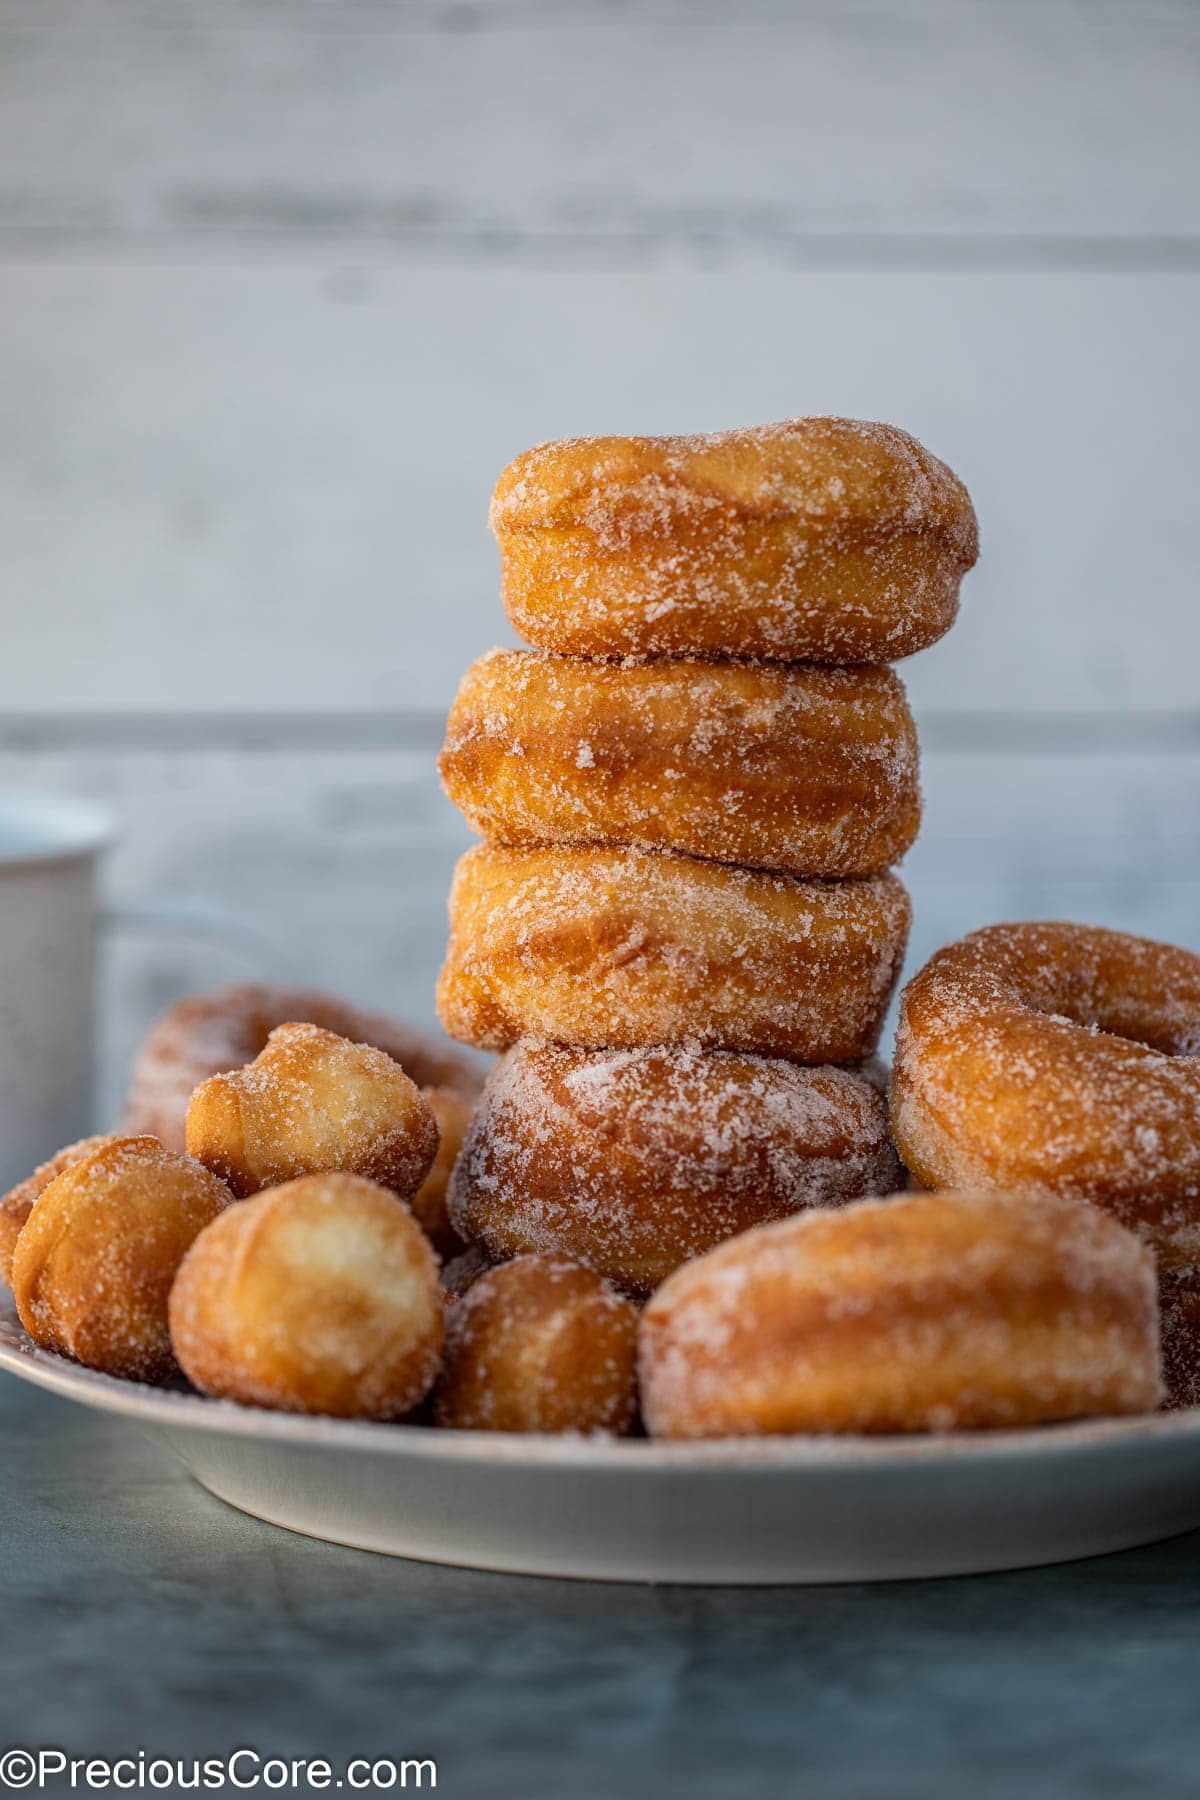 Sugar coated donuts and donut holes on a white plate.